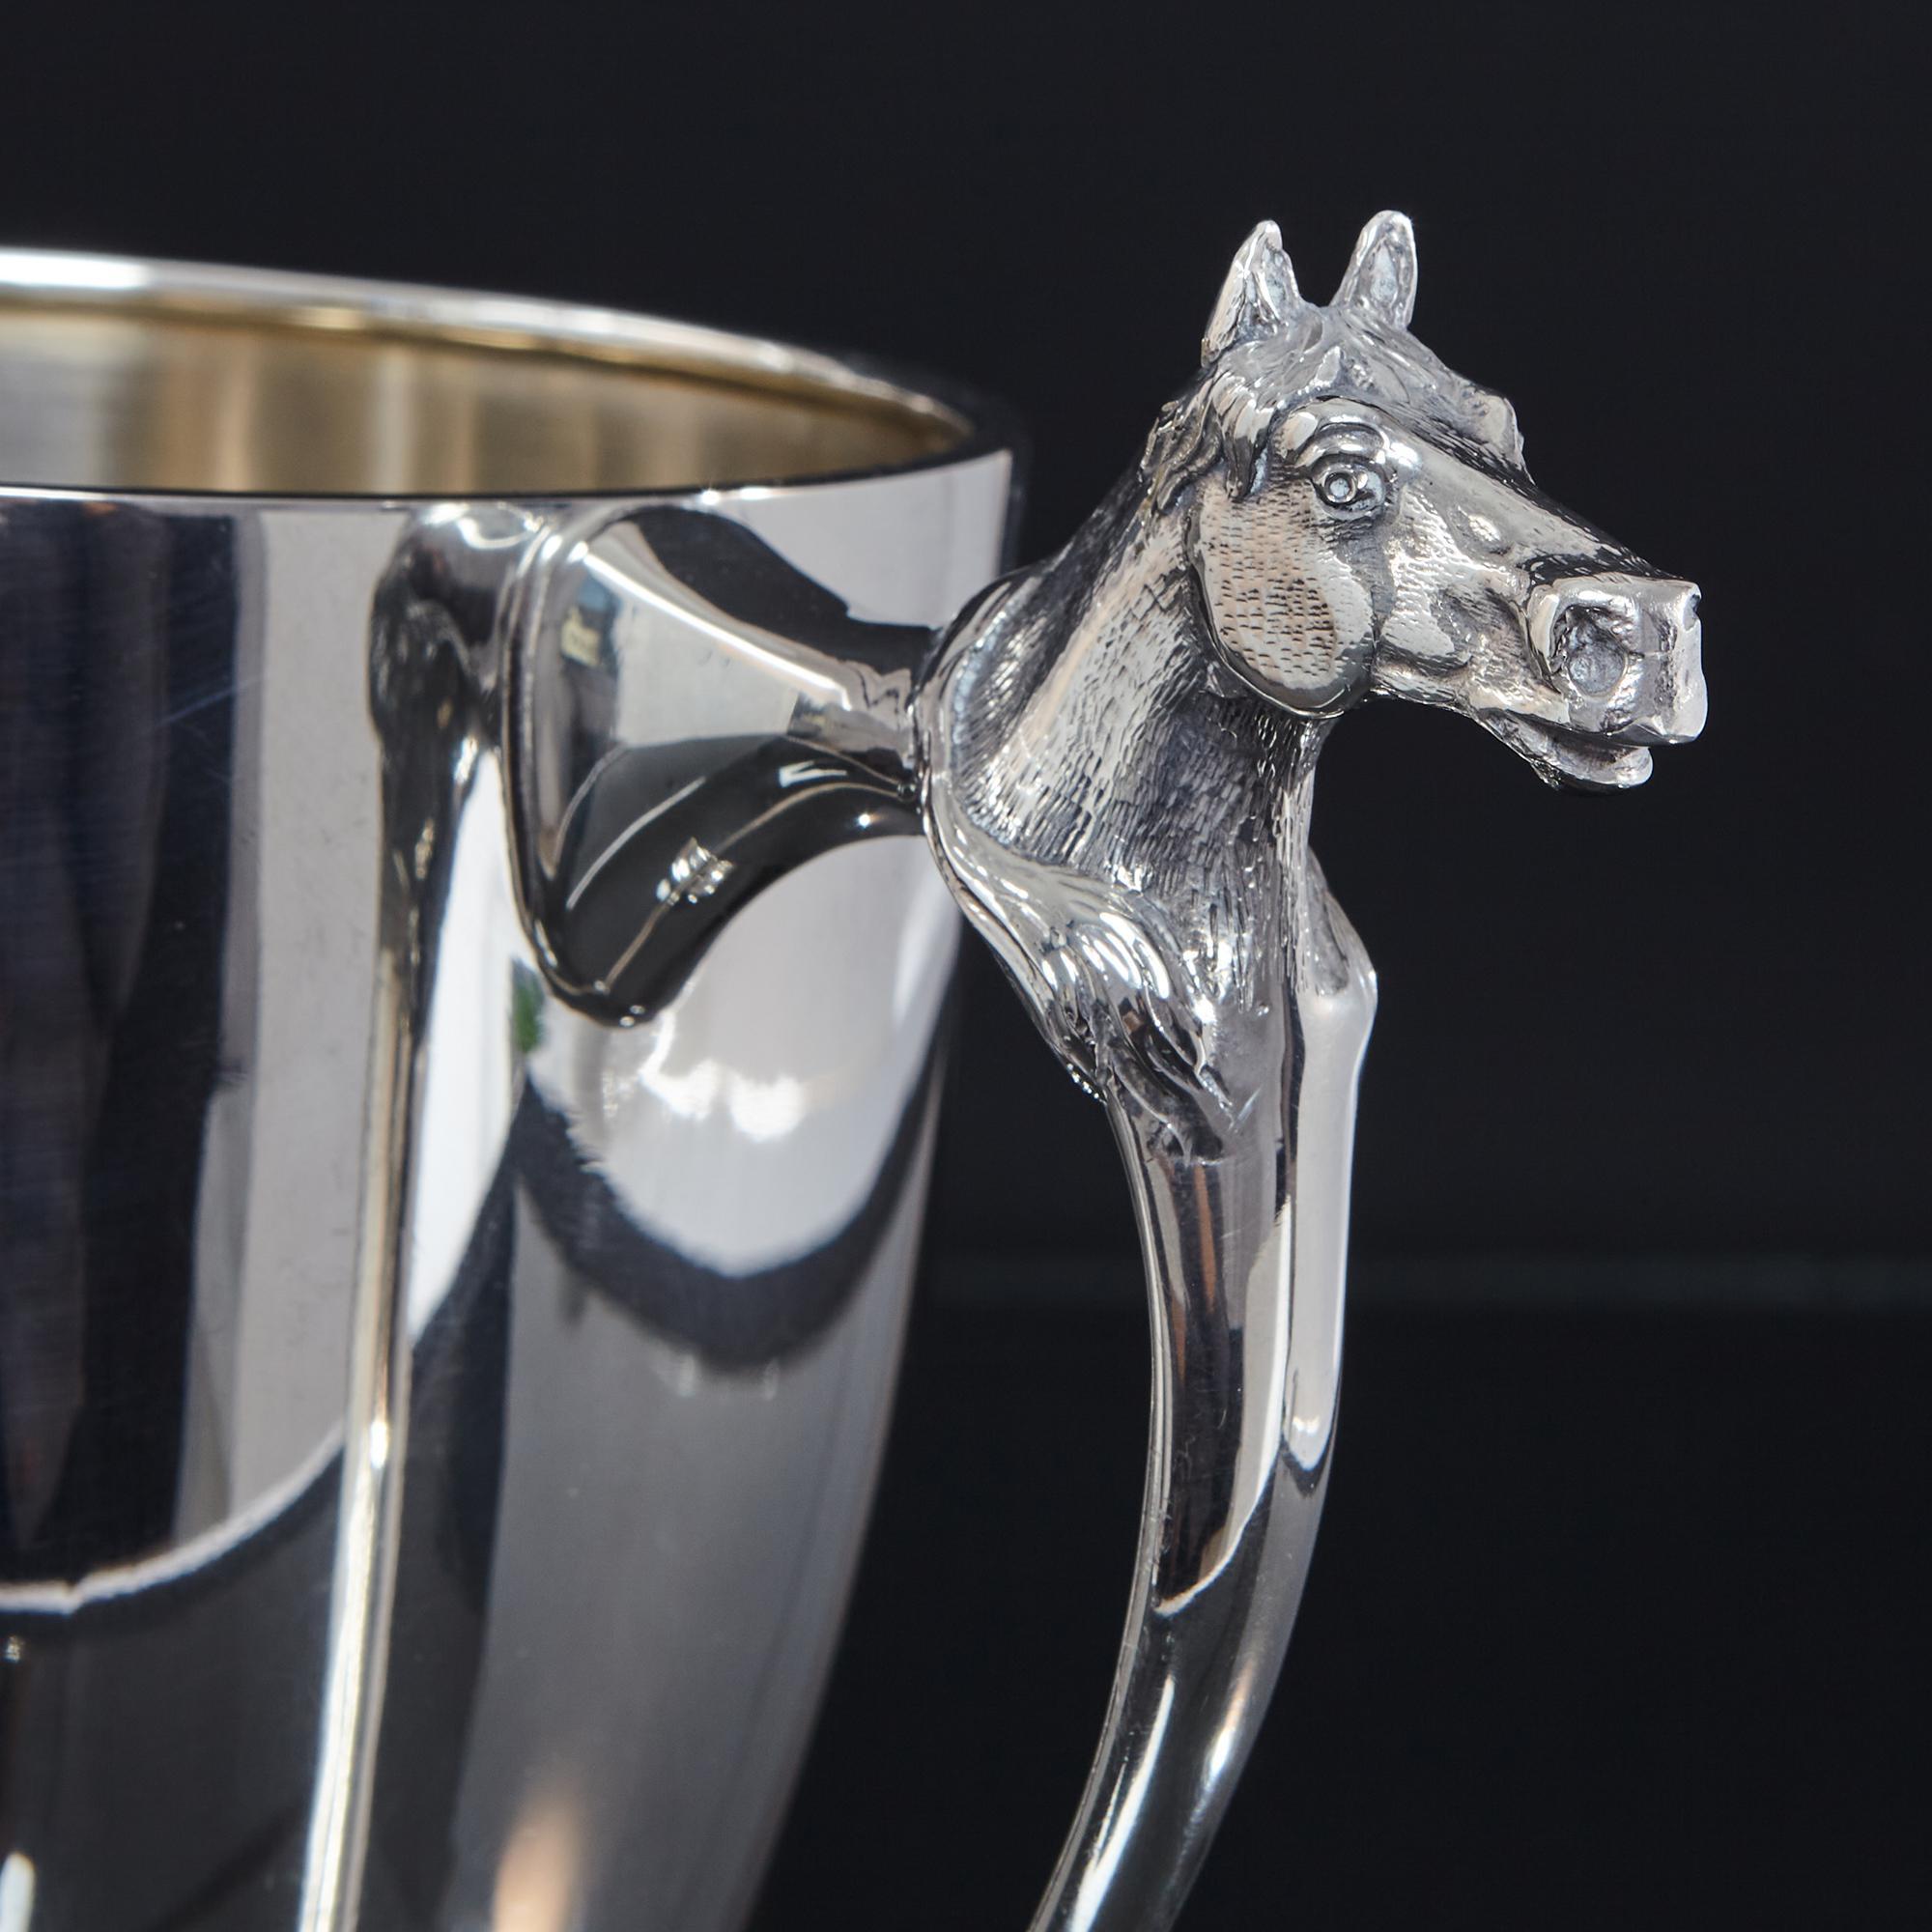 A two-handled silver trophy cup of equine interest. This early 20th century silver cup is of a particularly good gauge of silver creating a tremendously heavy piece and is decorated with two cast horse head mounts on the handles. Suitable for